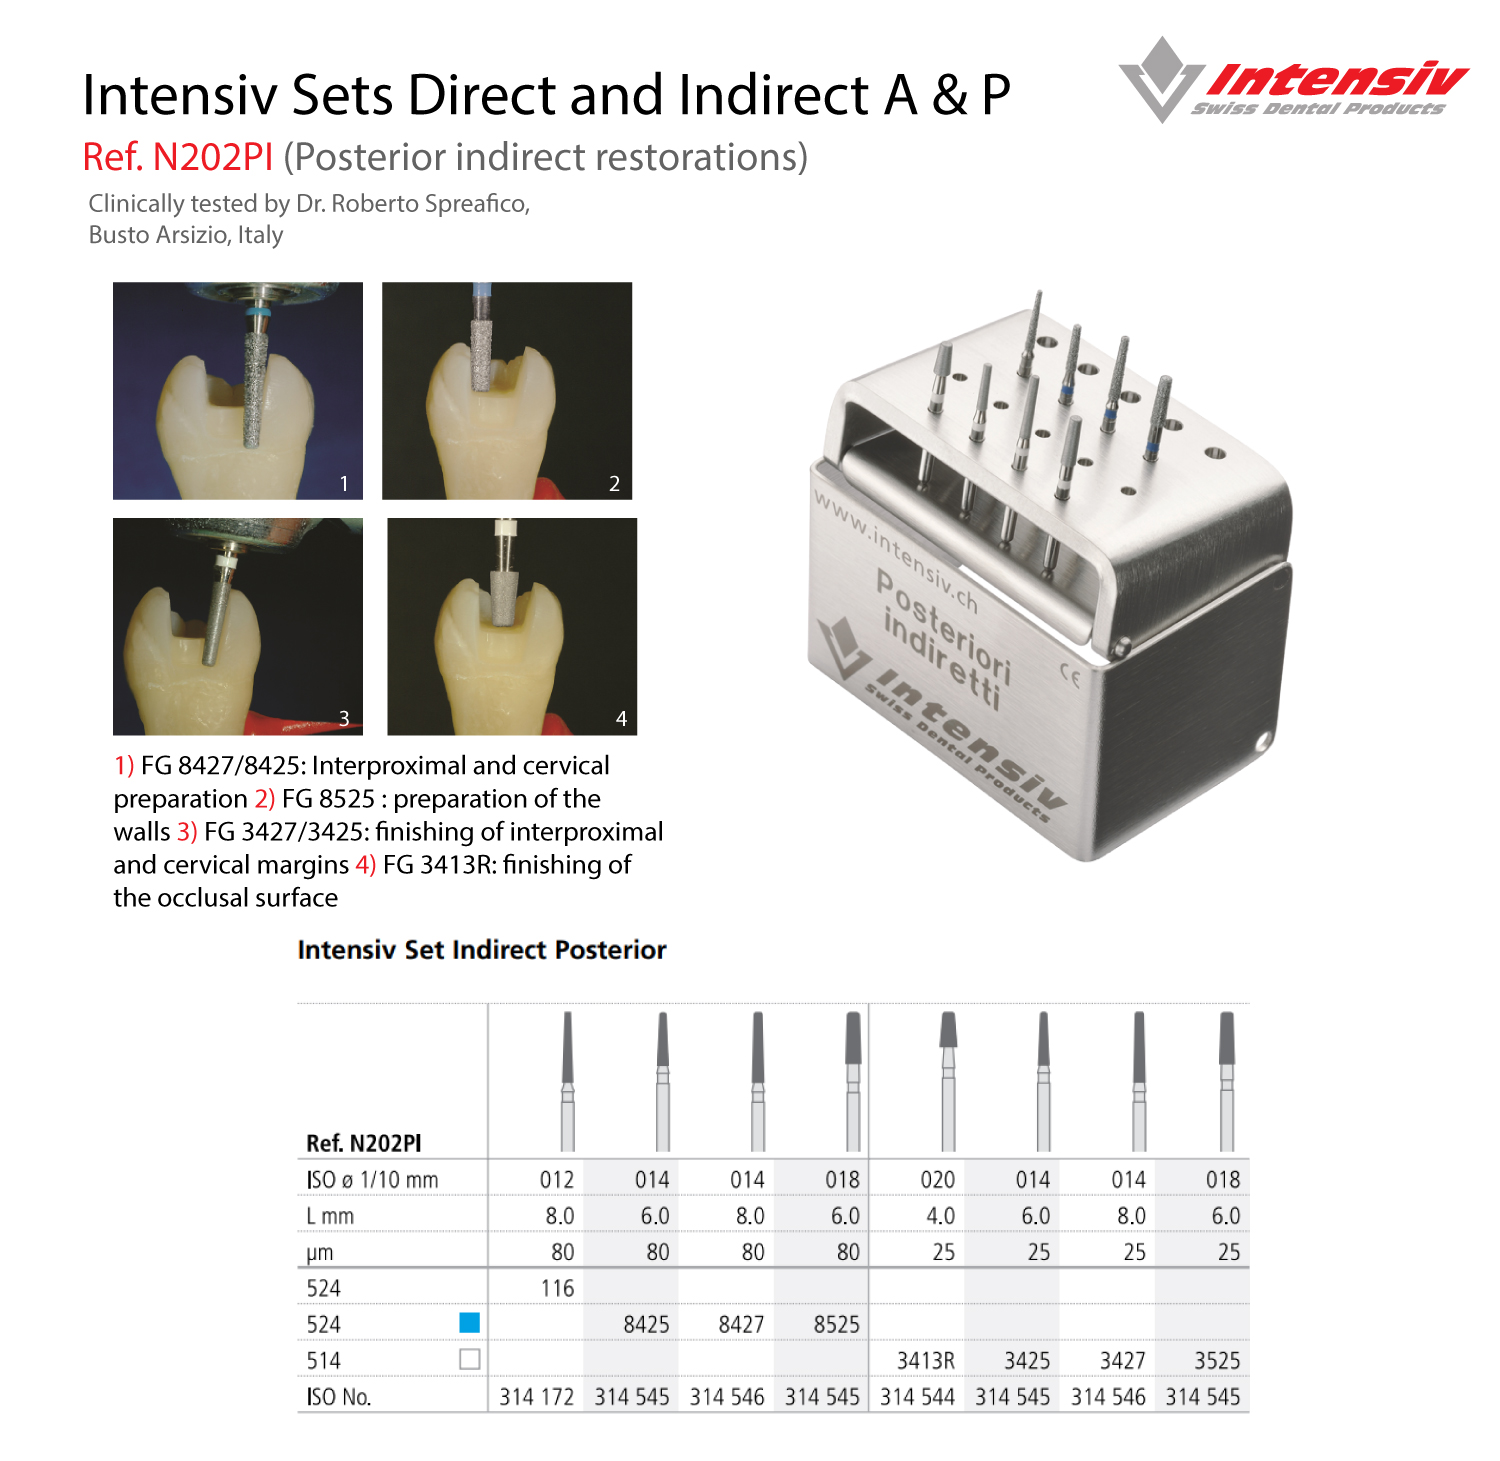 Intensiv Sets Direct and Indirect A&P